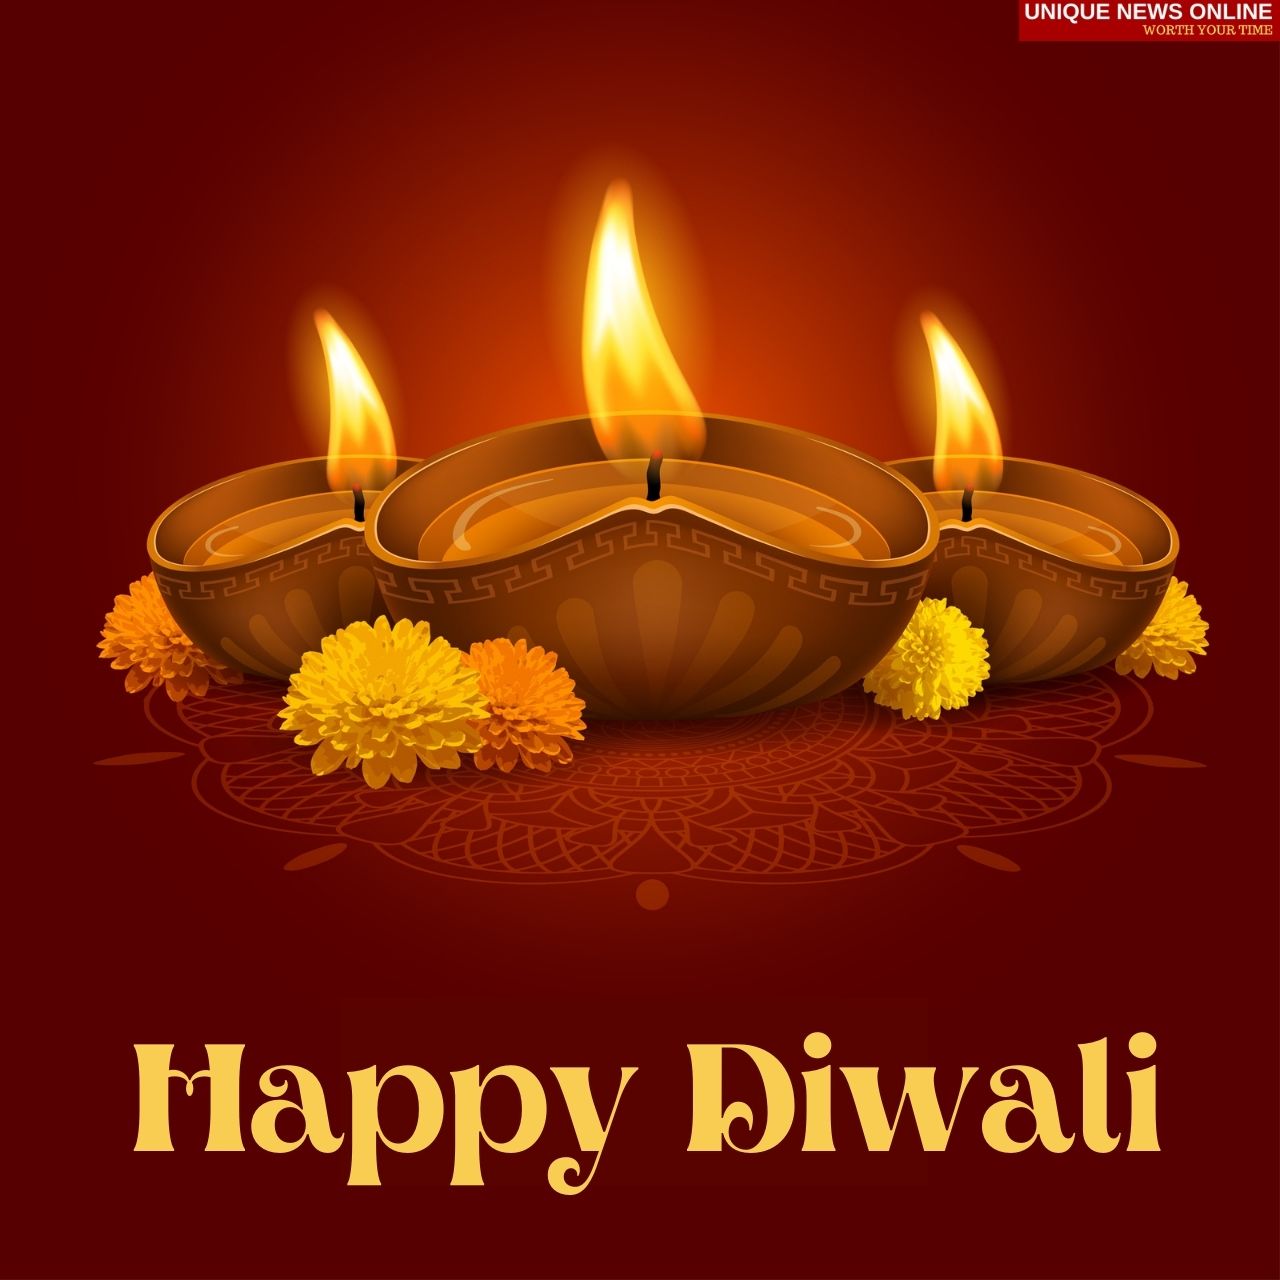 Happy Diwali 2021 Wishes, Greetings, Quotes, HD Images, Messages, and Greetings to greet your Loved Ones